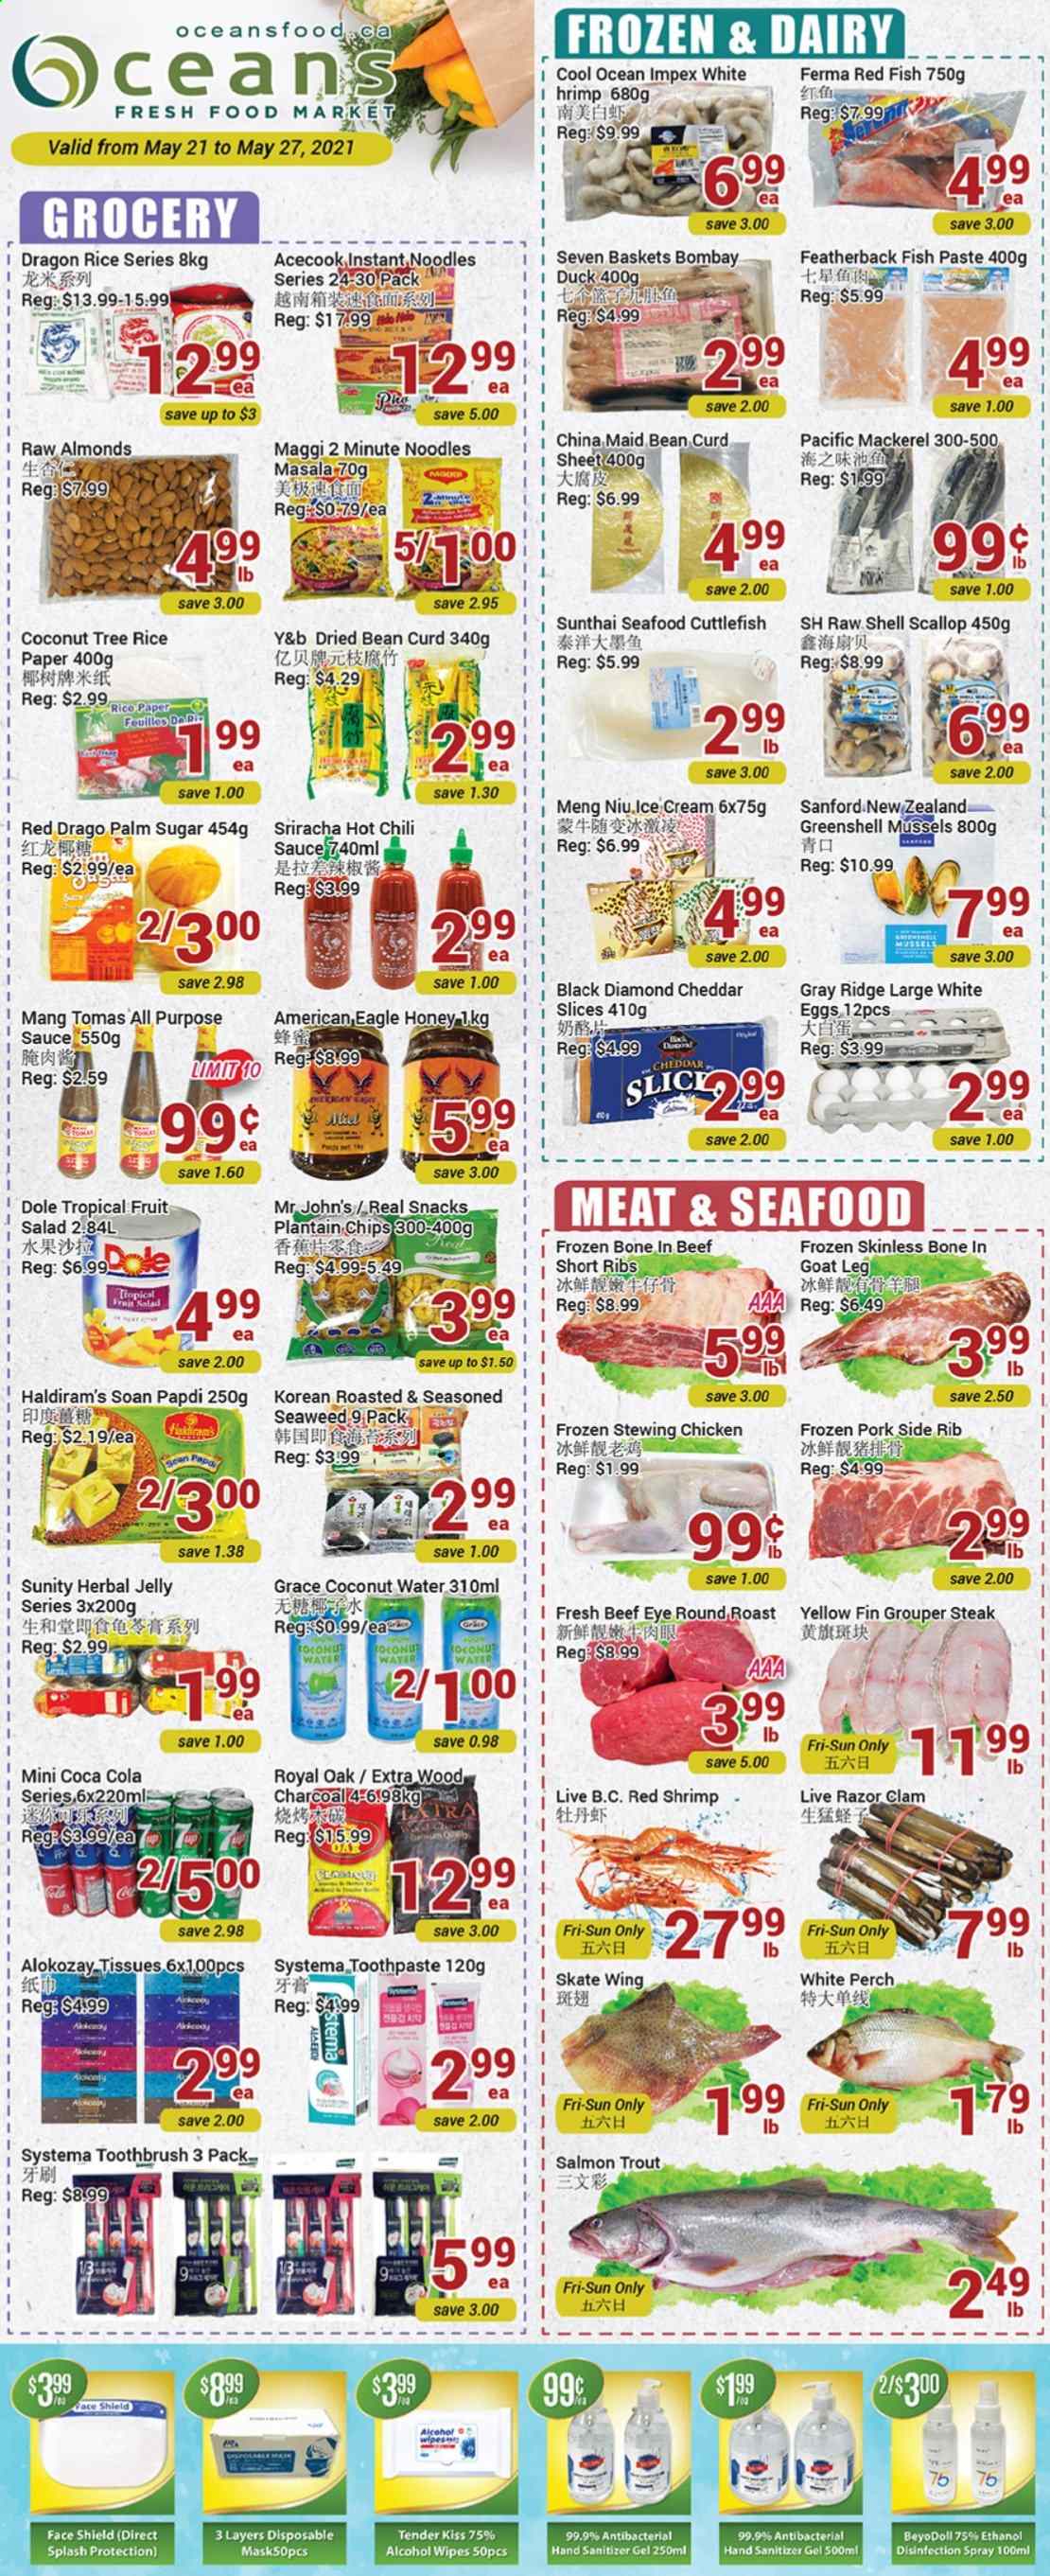 thumbnail - Oceans Flyer - May 21, 2021 - May 27, 2021 - Sales products - Ace, salad, Dole, clams, cuttlefish, grouper, mackerel, mussels, salmon, scallops, trout, perch, seafood, fish, shrimps, instant noodles, sauce, noodles, cheese, curd, eggs, ice cream, snack, jelly, seaweed, Maggi, fruit salad, rice, sriracha, chilli sauce, honey, almonds, Coca-Cola, coconut water, beef meat, beef ribs, eye of round, round roast, wipes, tissues, toothbrush, toothpaste, razor, hand sanitizer, steak. Page 1.